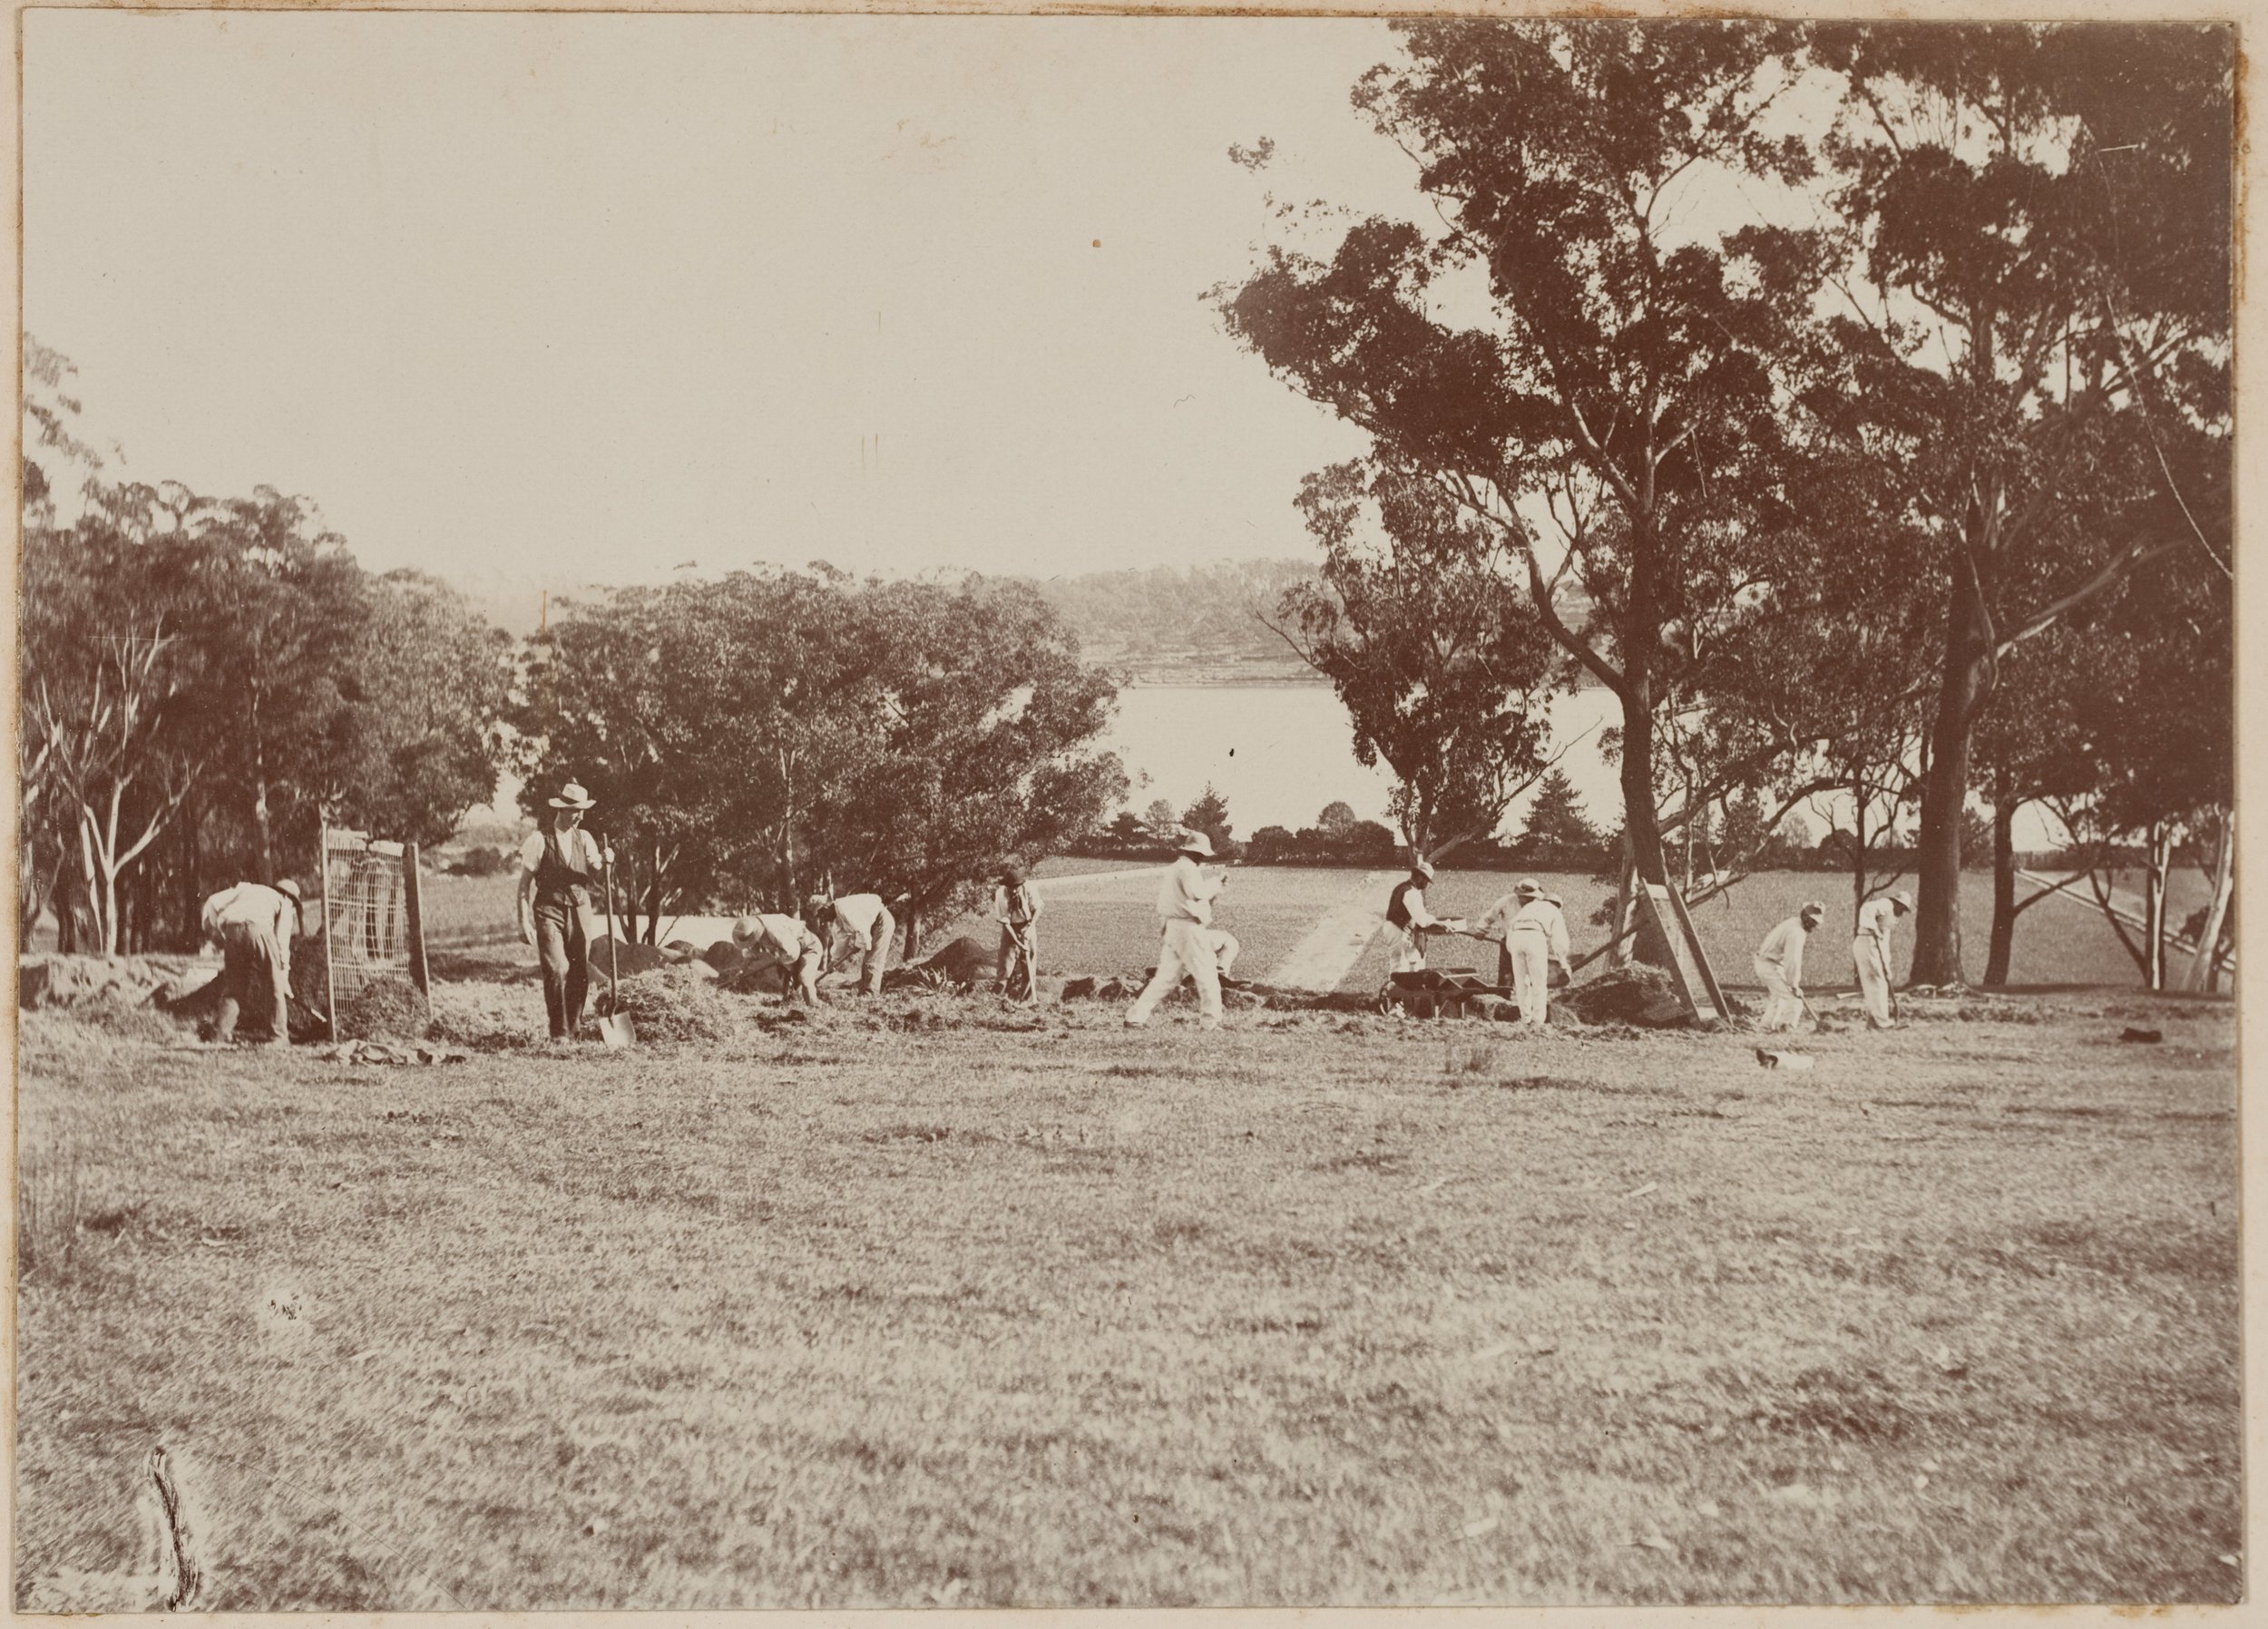 Farming at Callan Park, with Sydney Harbour in the background